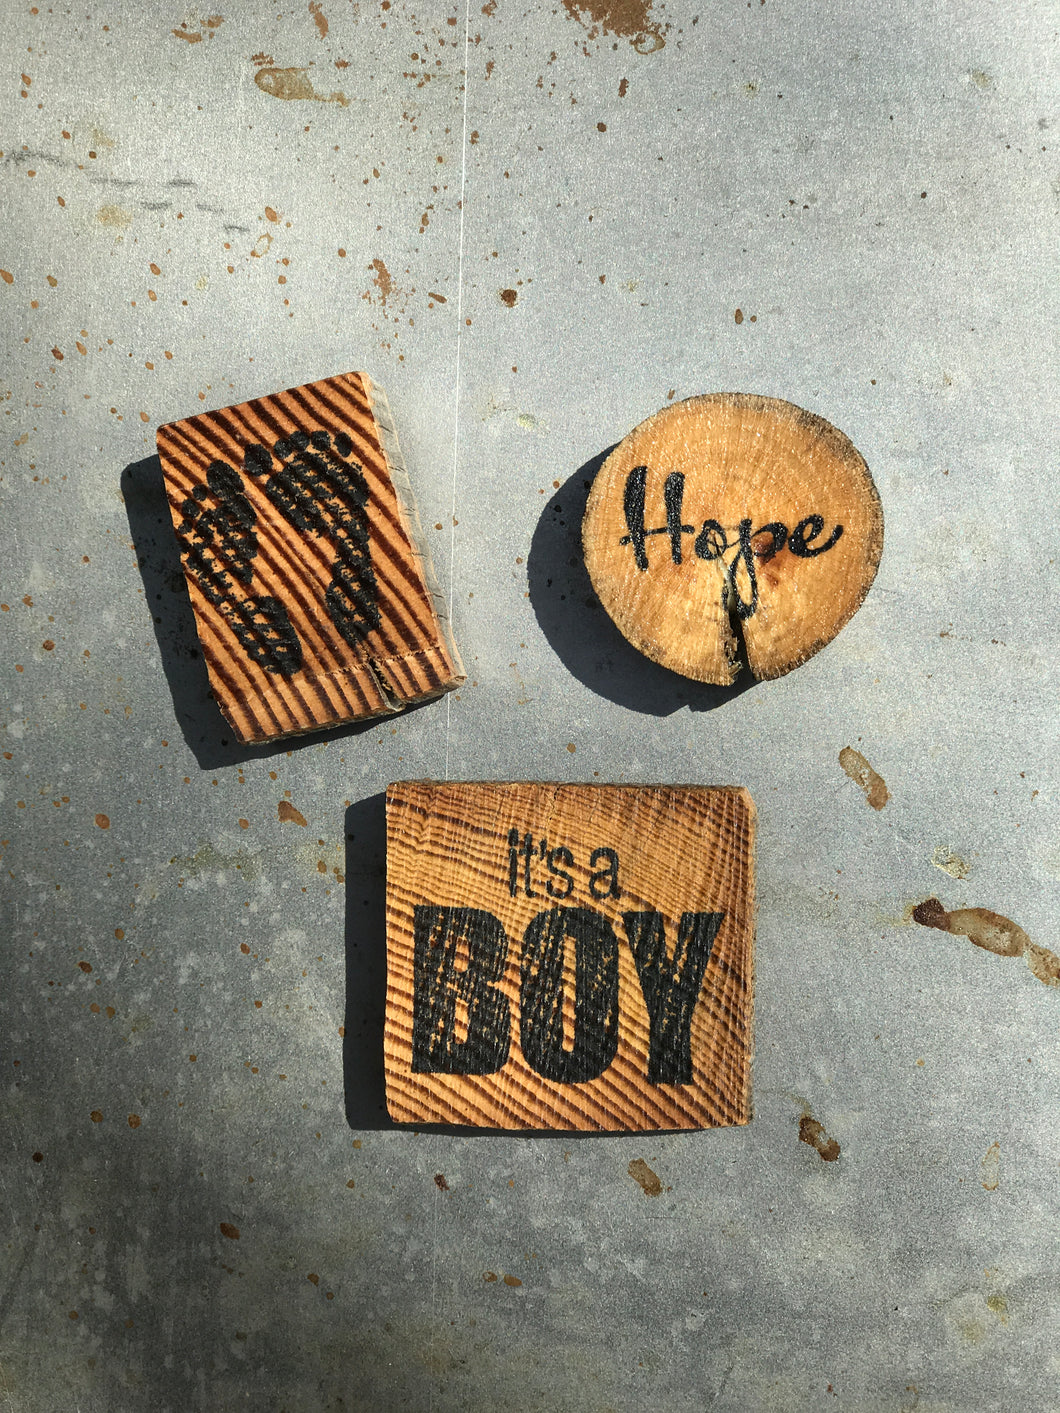 It's A Boy / Baby Feet / Hope (Set of 3) - Upcycled Hand-made Wood Magnets